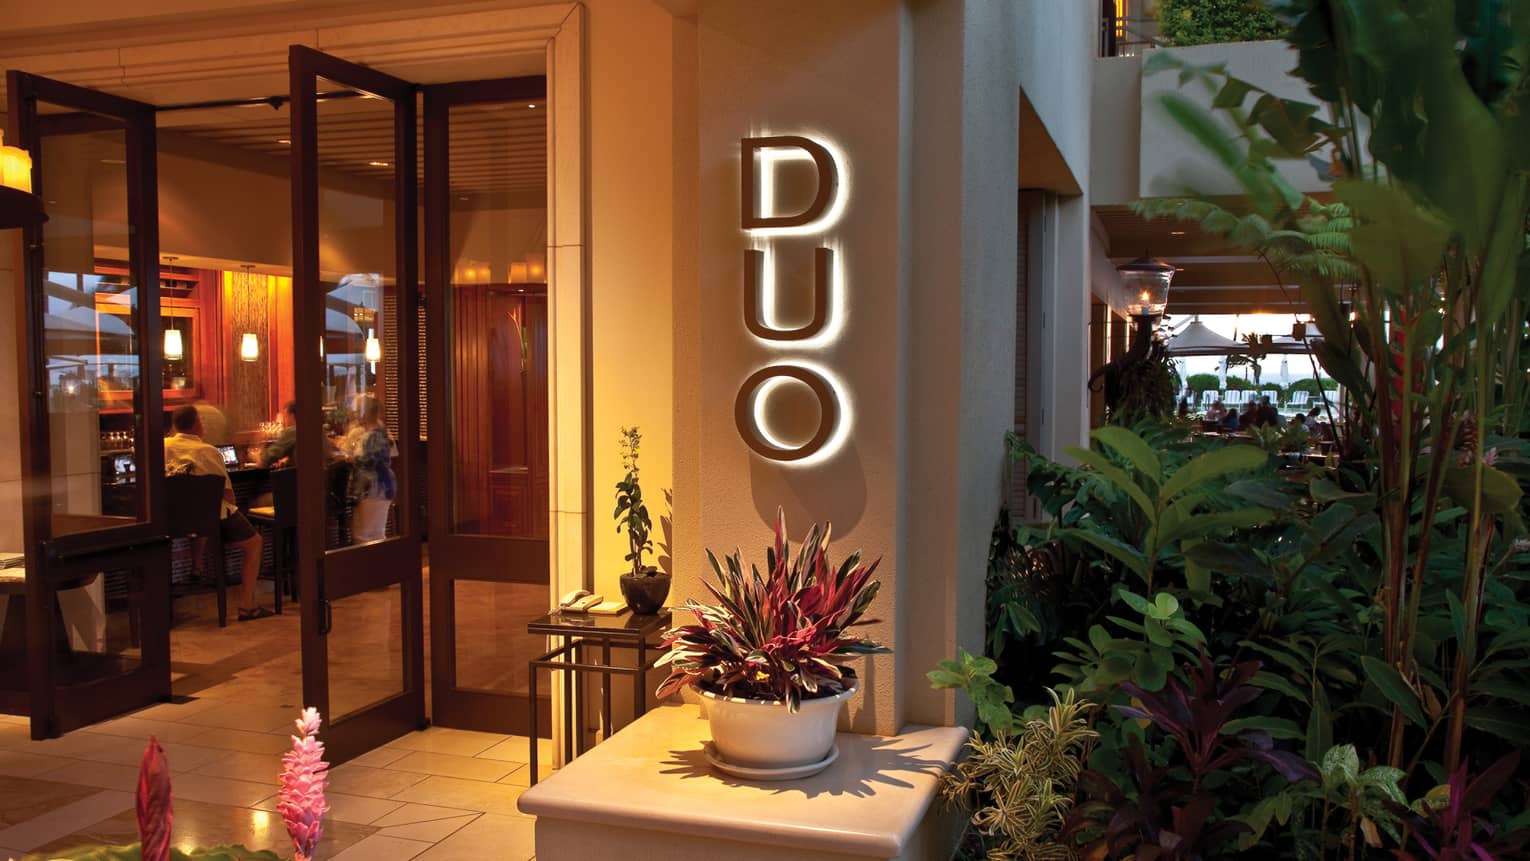 A view of the front door and reception at DUO Steak and Seafood, Four Seasons Resort Maui at Wailea, surrounded by local fauna